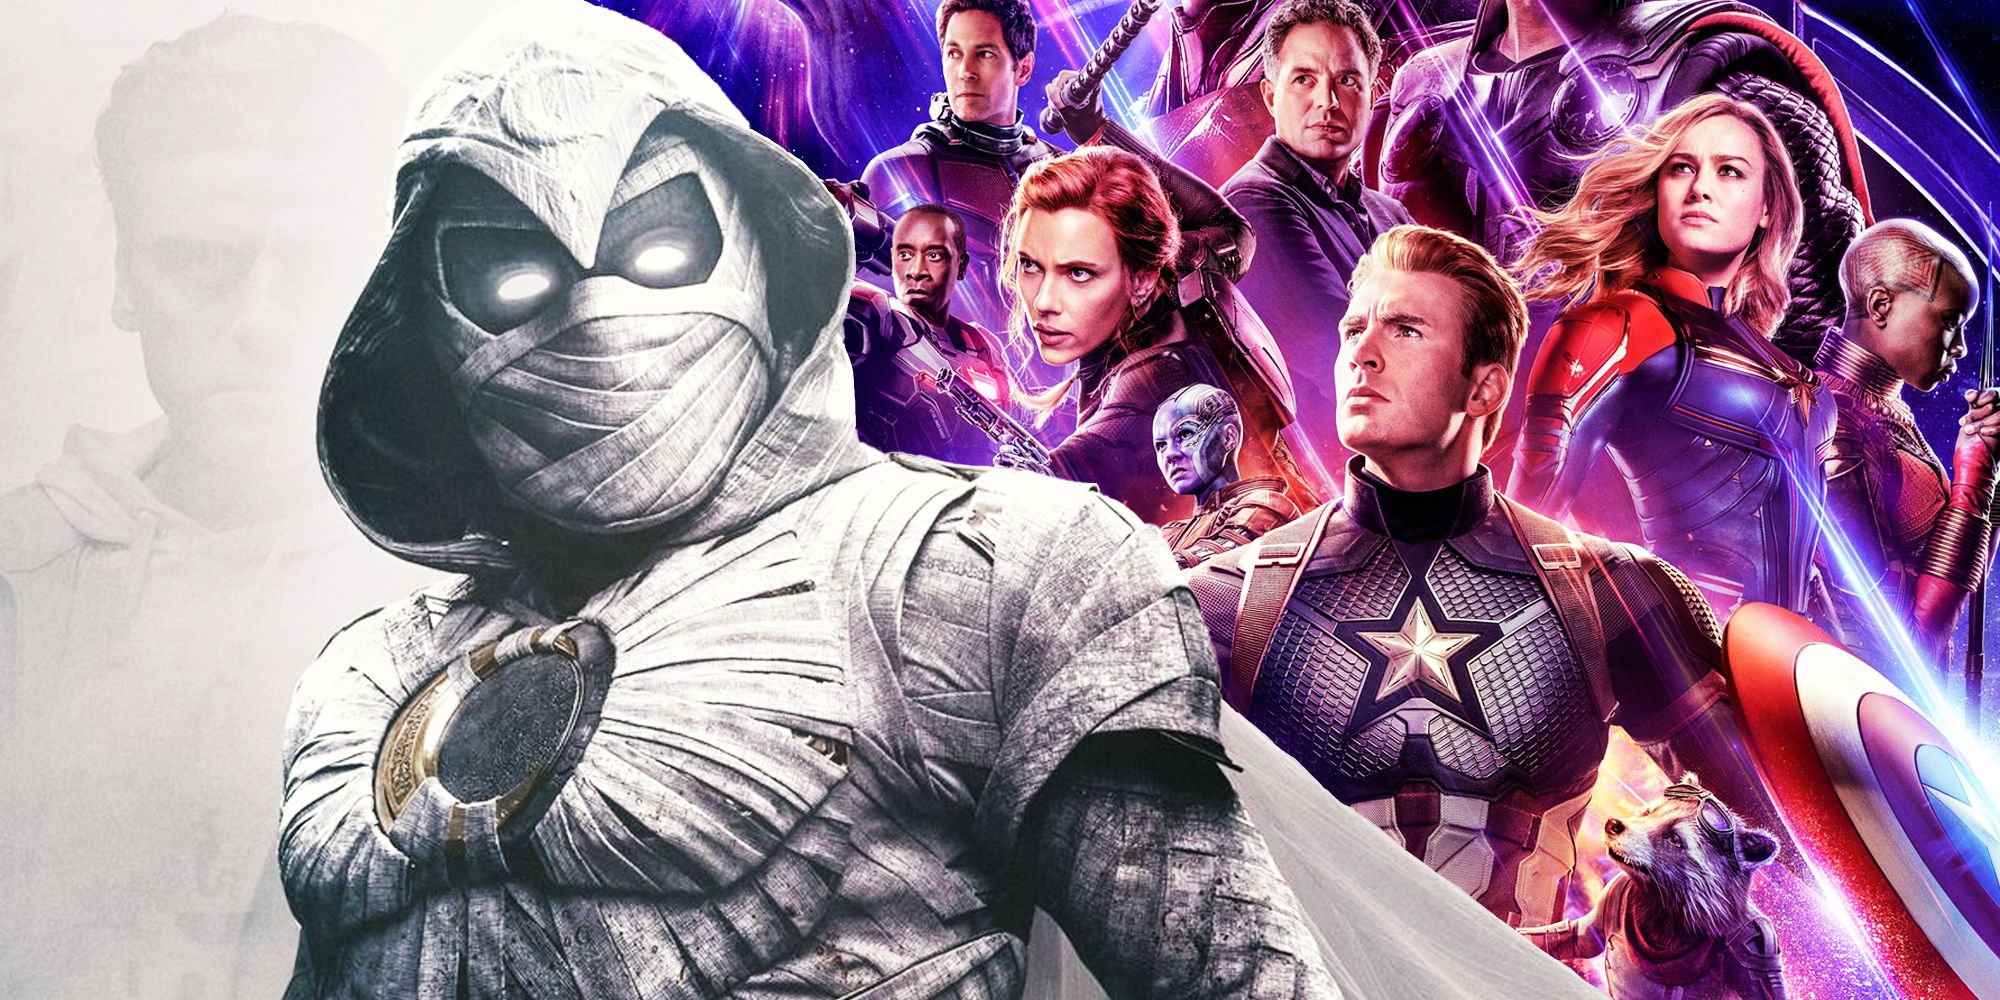 Moon Knight and the Avengers Endgame poster.